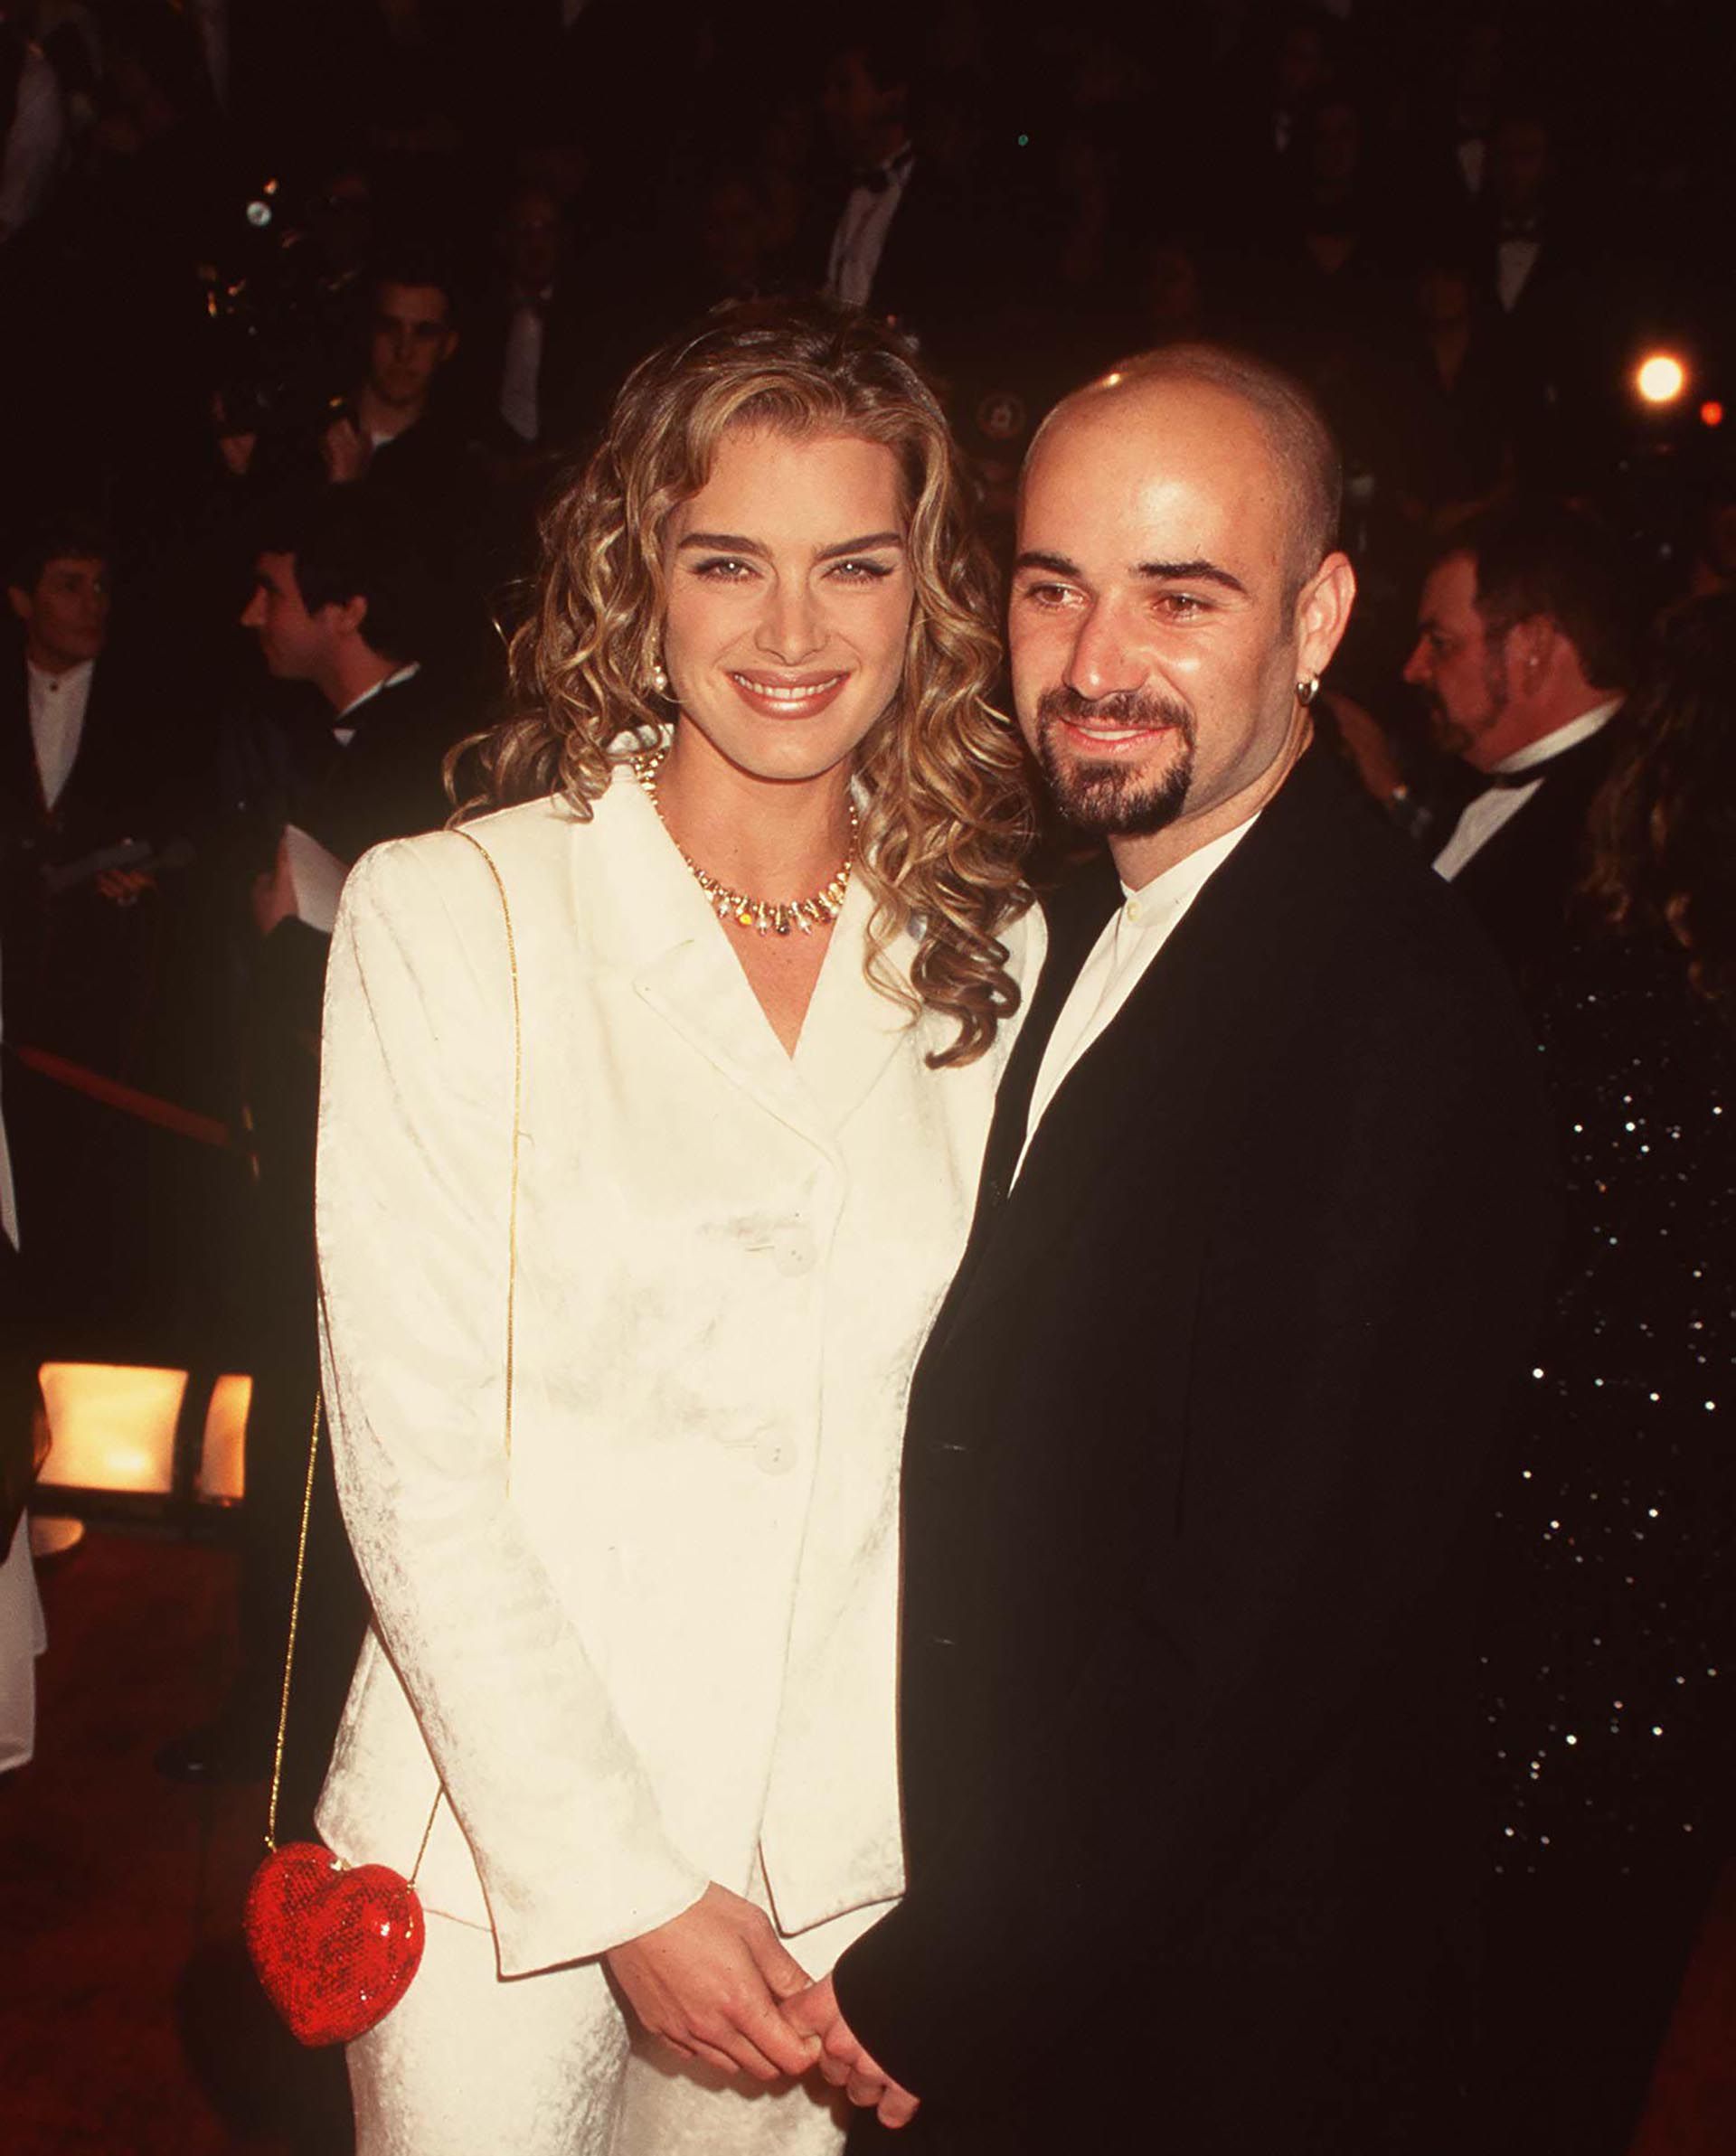 Shields Brooke con Andre Agassi en 1999 (Grosby Group)